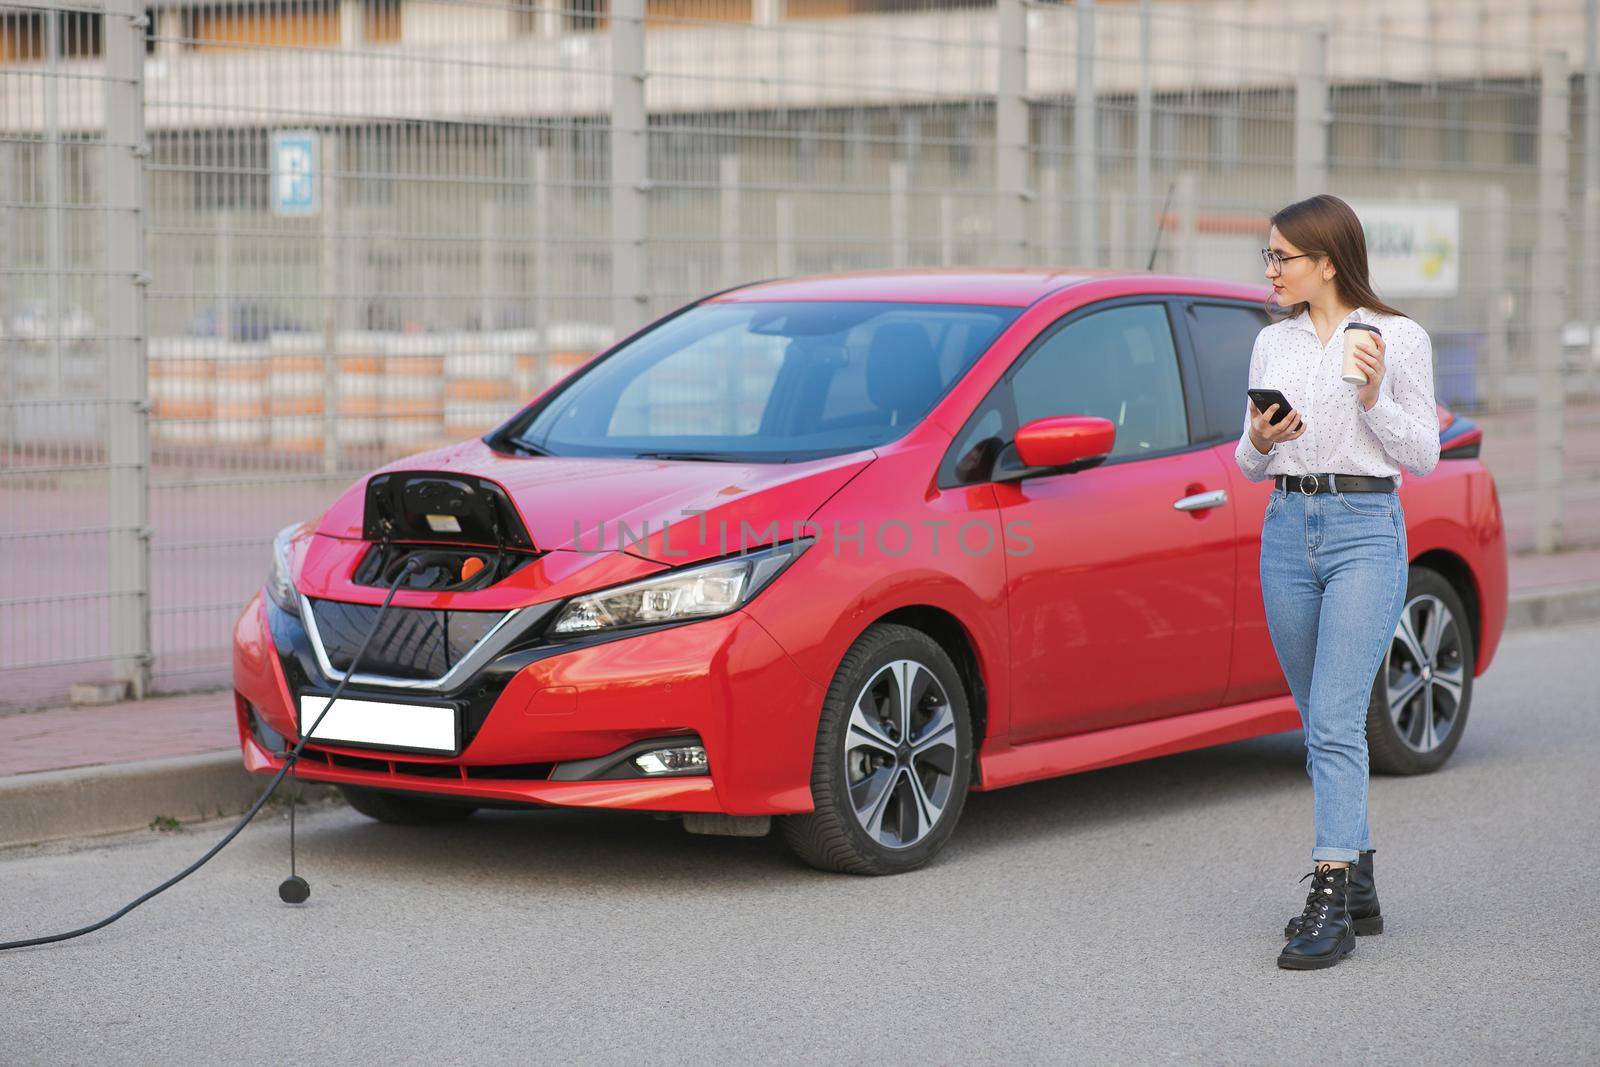 Girl Use Coffee Drink While Using Smart Phone and Waiting Power Supply Connect to Electric Vehicles for Charging the Battery in Car. by uflypro